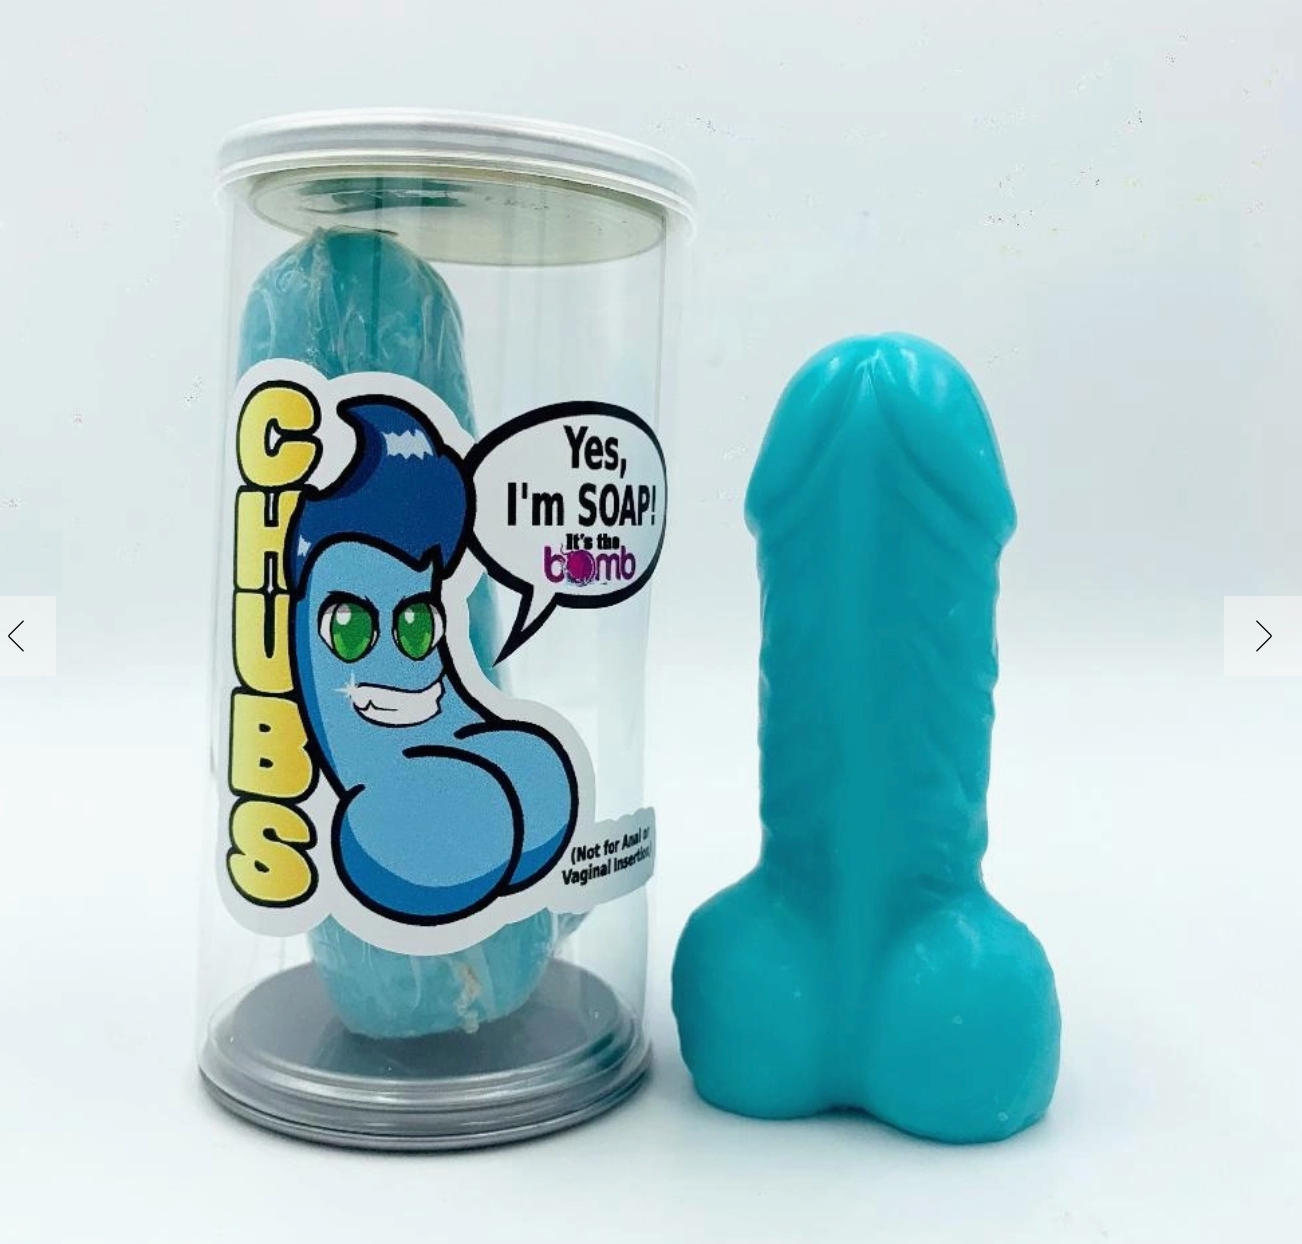 Chubs Cute Penis Party Soap